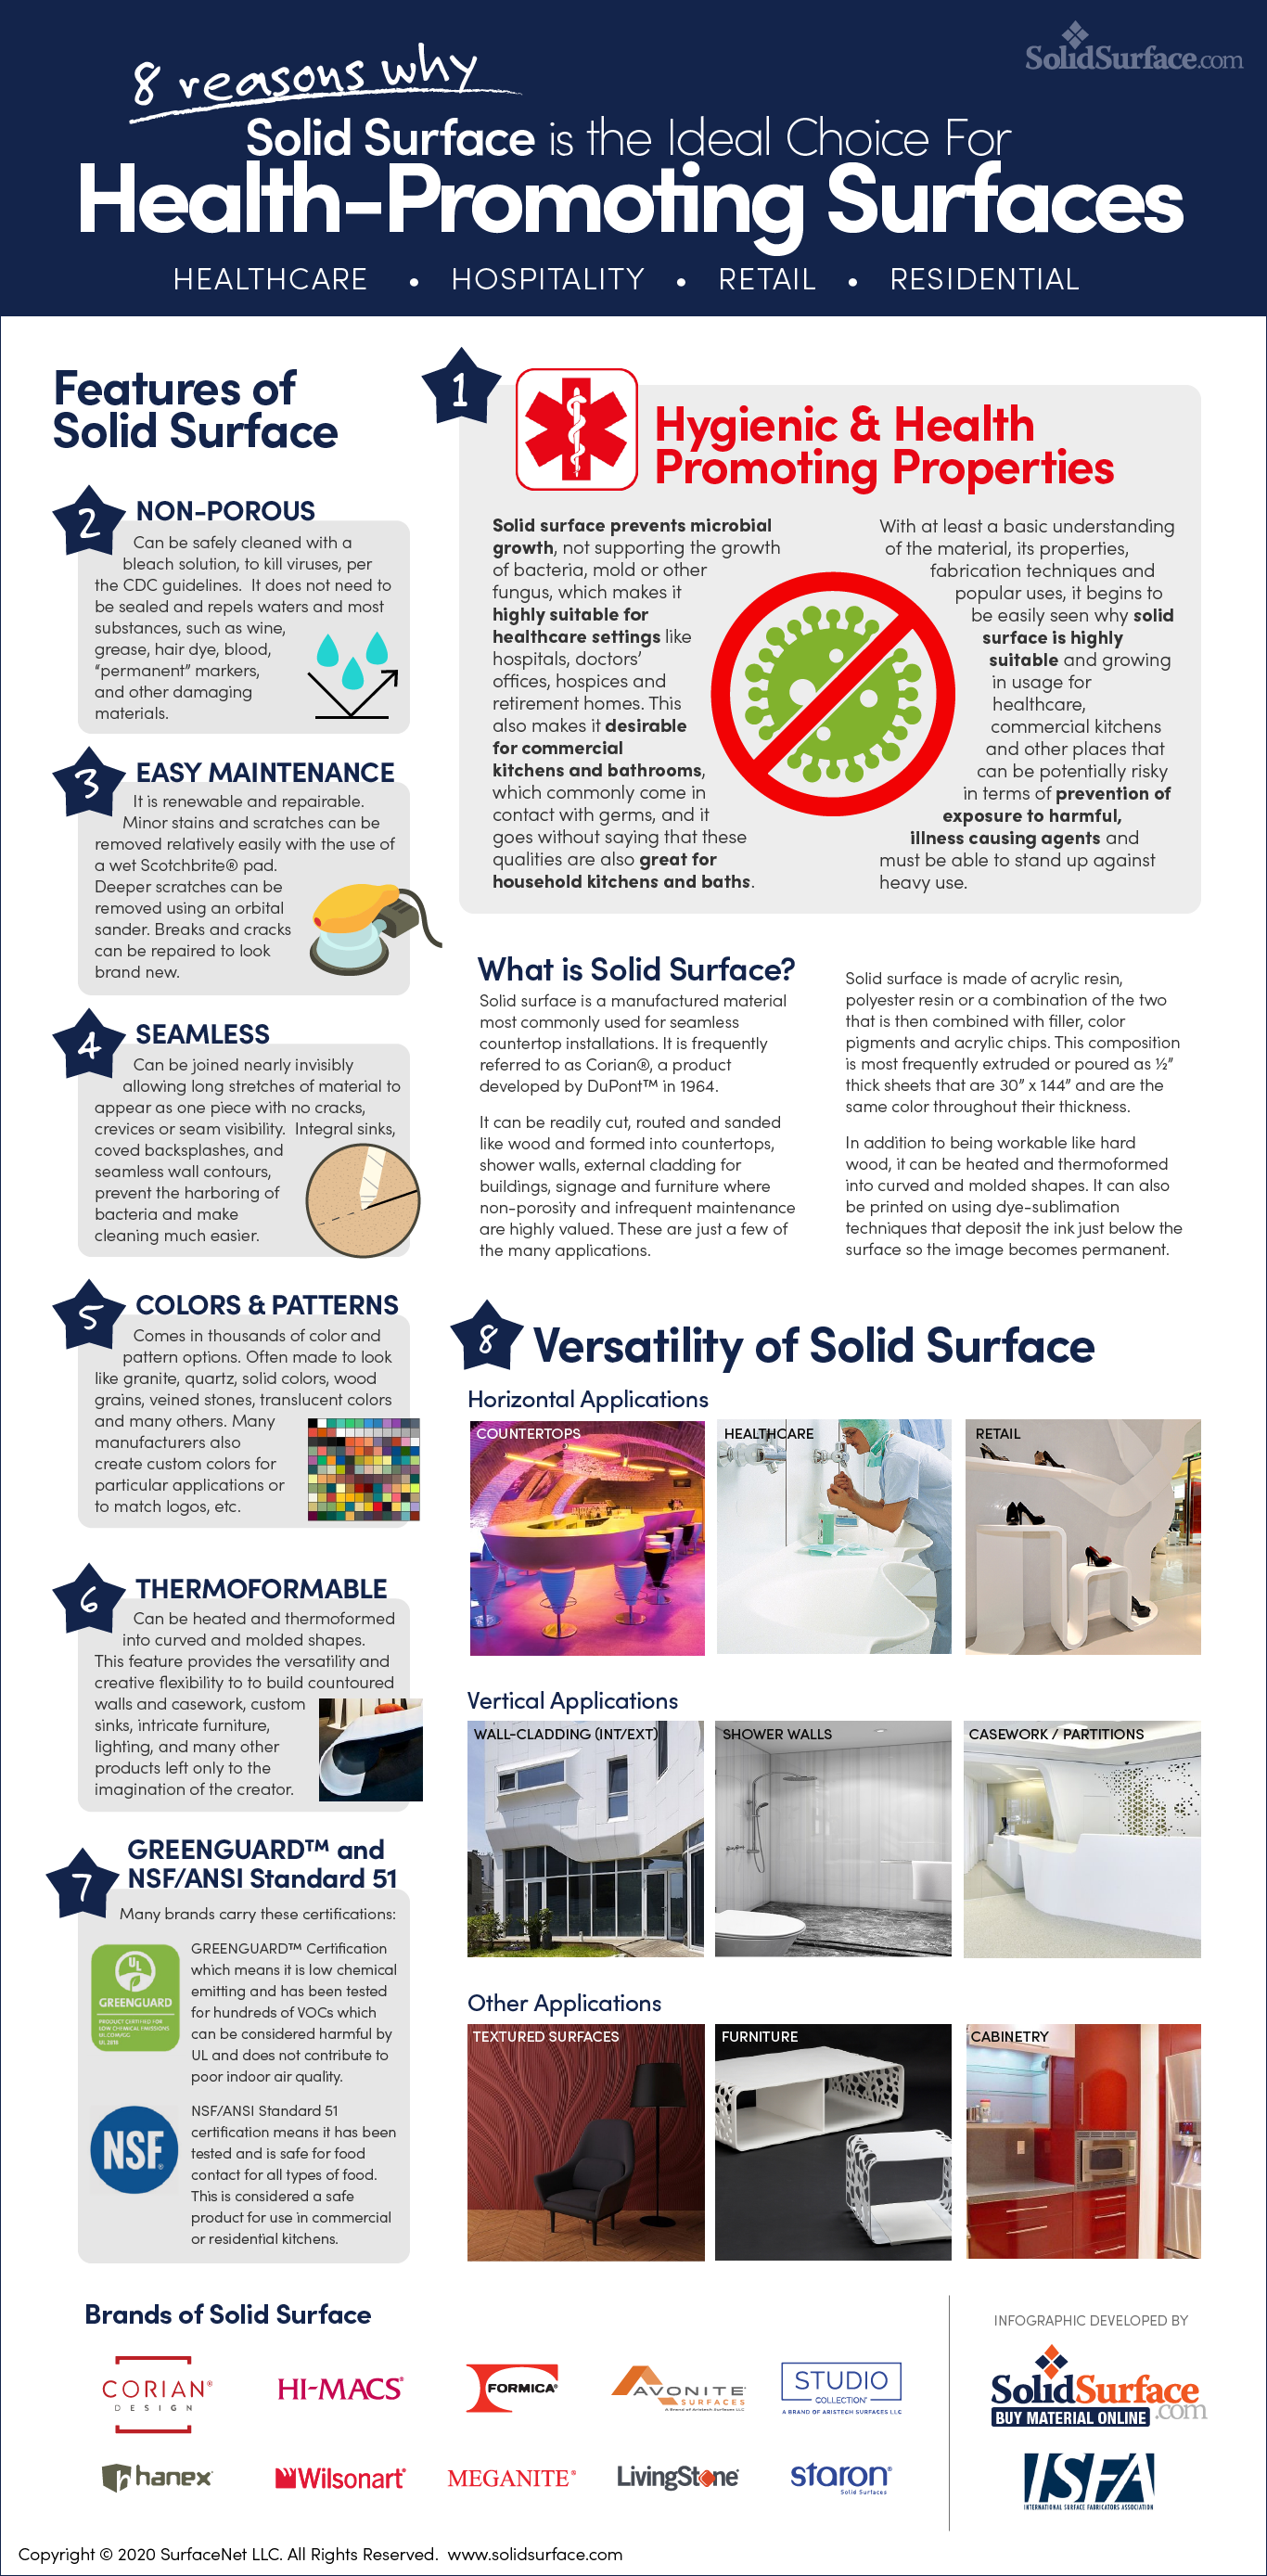 Health-Promoting Surfaces: 8 reasons why Solid Surface is the 